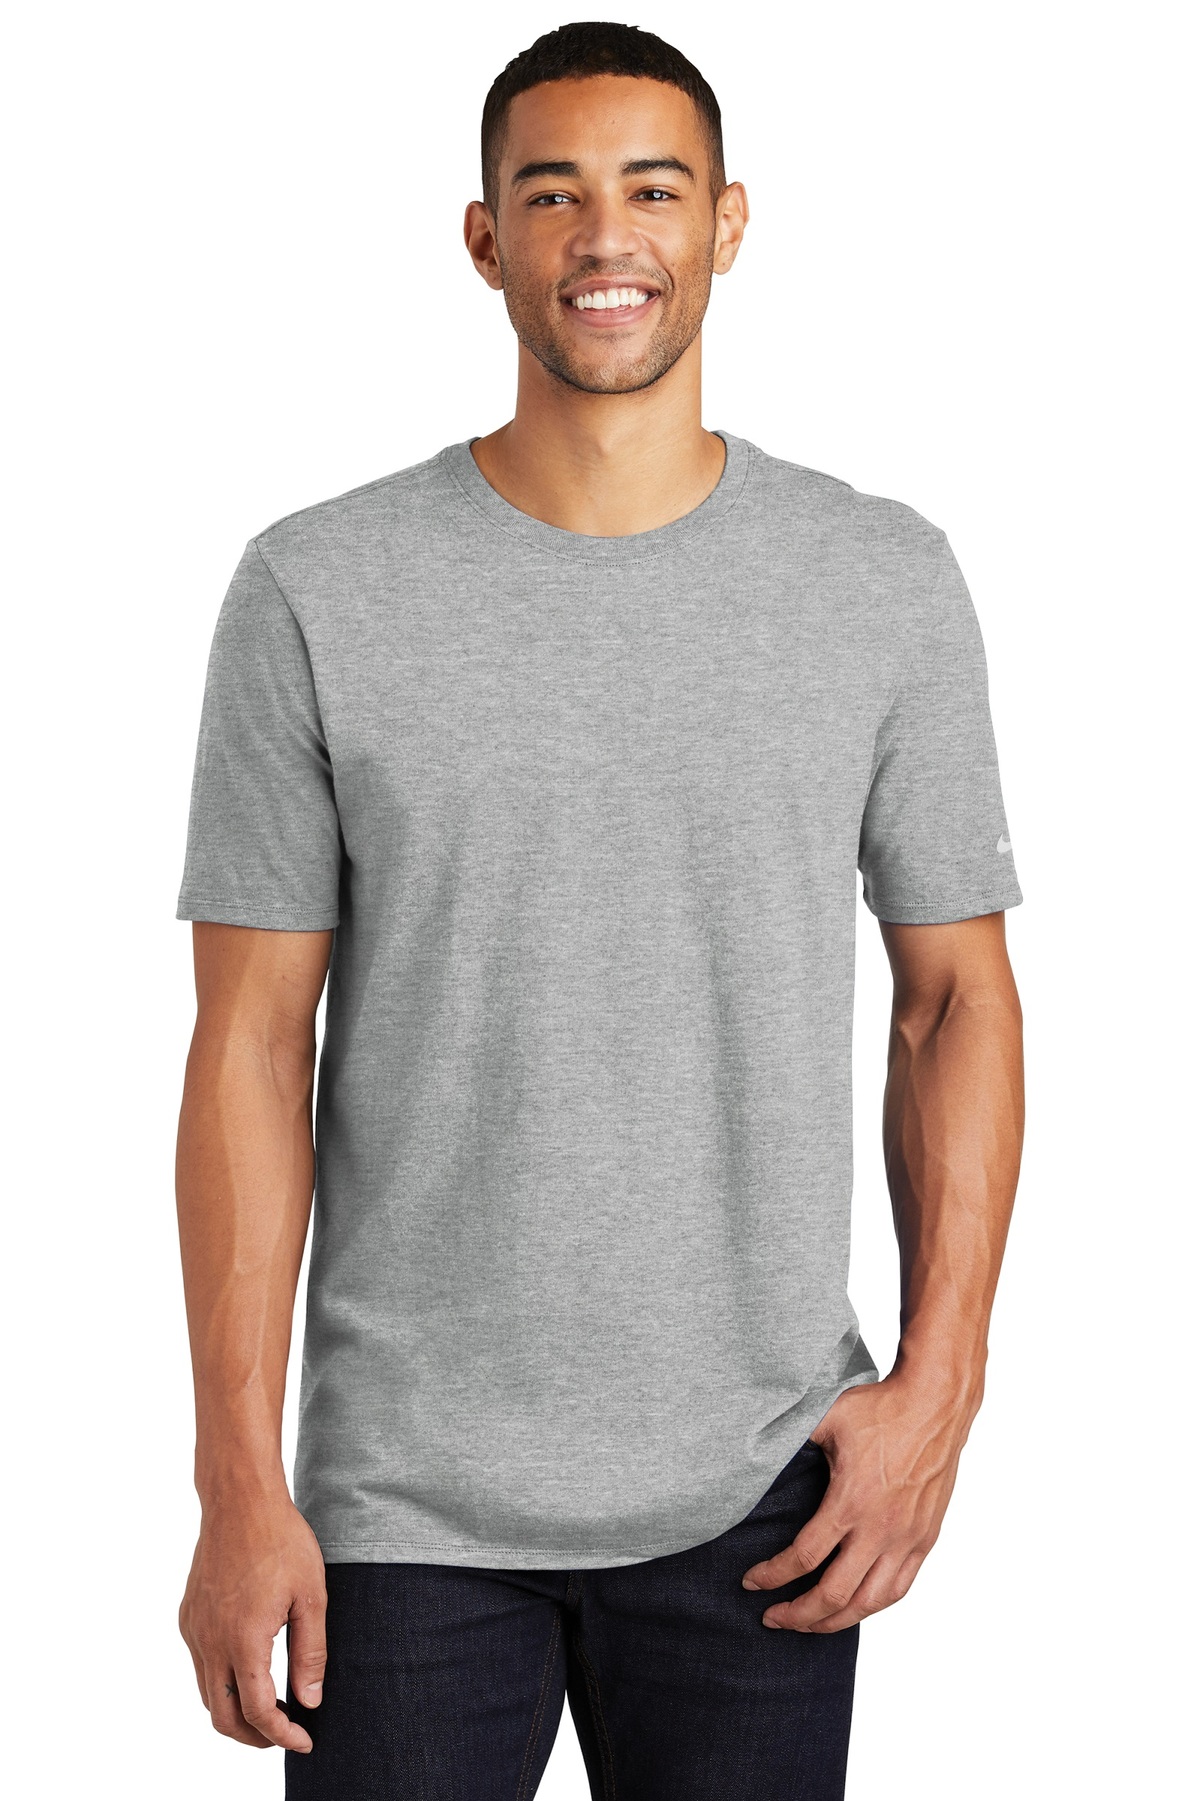 Nike Embroidered Men's Core Cotton Tee | Custom Embroidered T Shirts ...